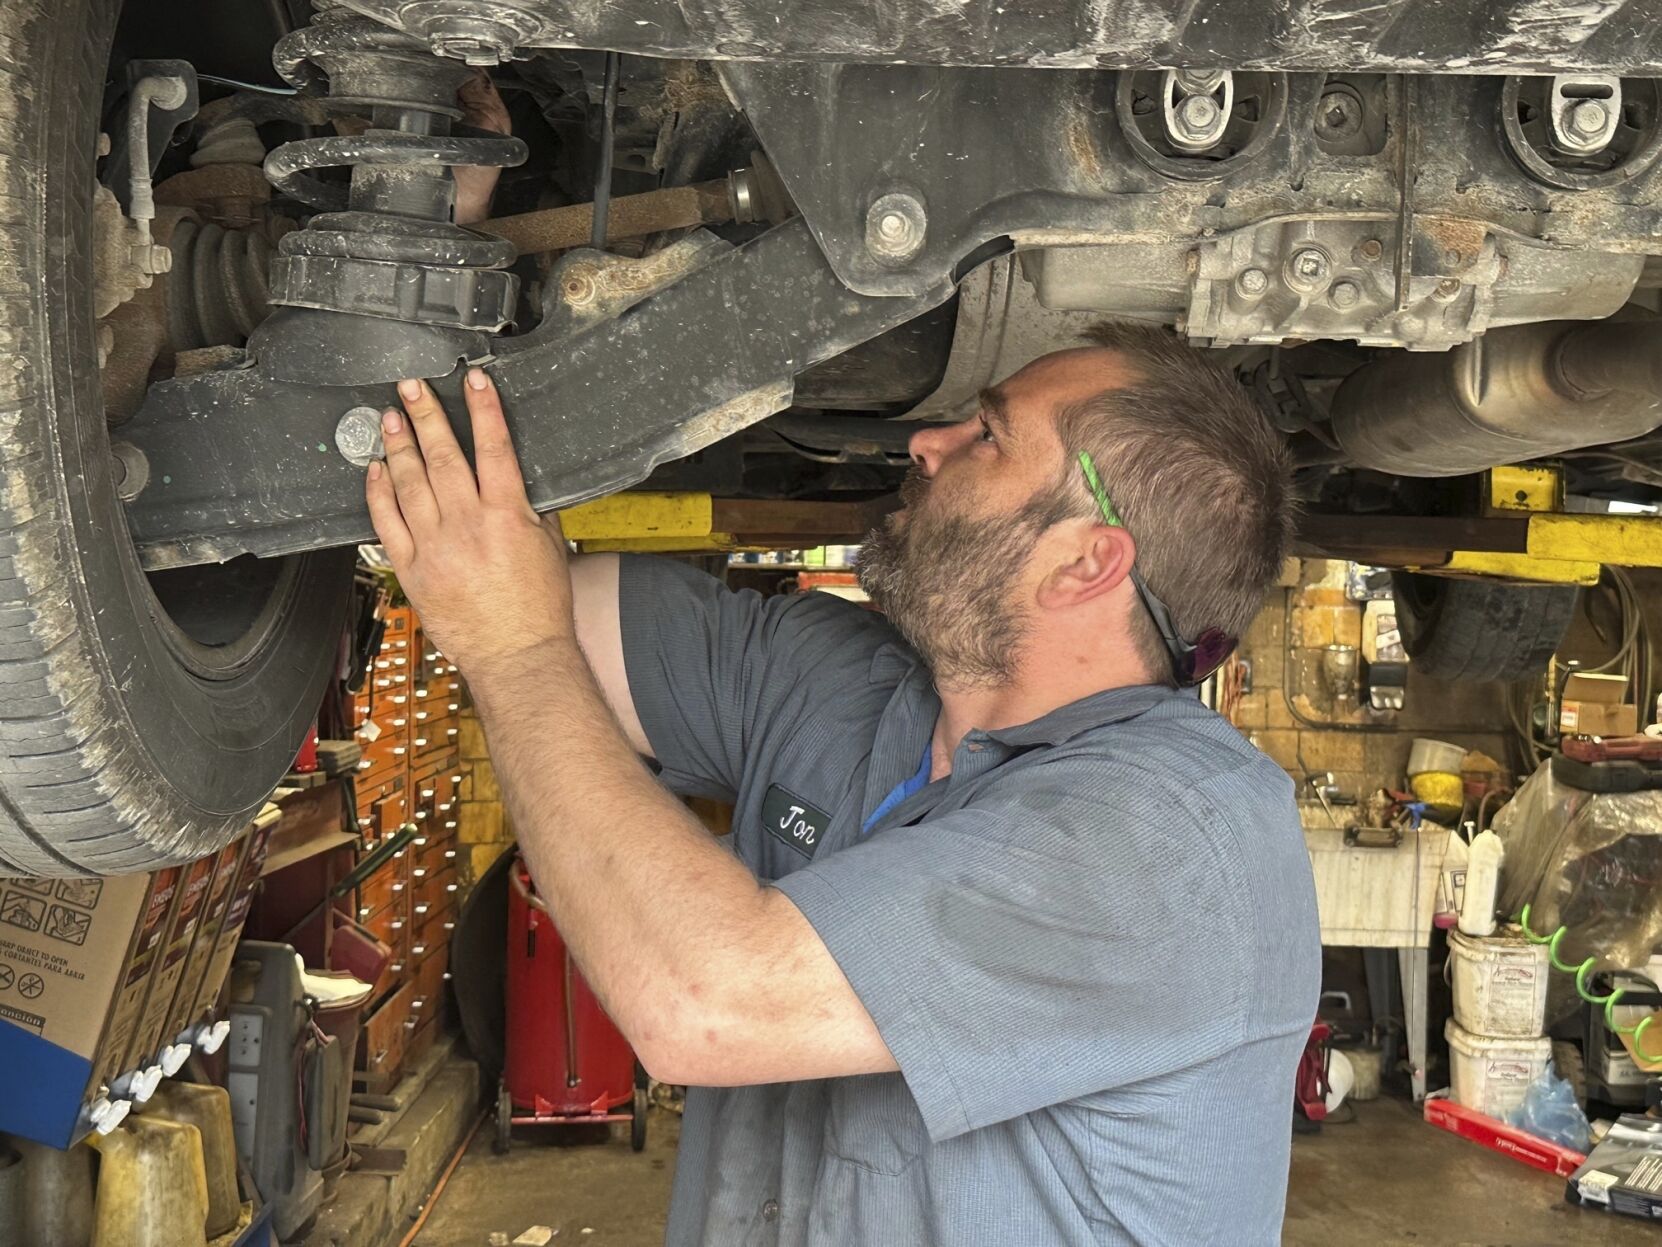 <p>Mechanic Jon Guthrie inspects the underside of a 2014 Honda Ridgeline pickup truck at Japanese Auto Professional Service in Ann Arbor, Michigan. People are keeping their vehicles longer due to shortages of new ones and high prices. That drove the average U.S. vehicle age up to a record 12.5 years in 2022, according to S&P Global Mobility. (AP Photo/Tom Krisher)</p>   PHOTO CREDIT: Tom Krisher 